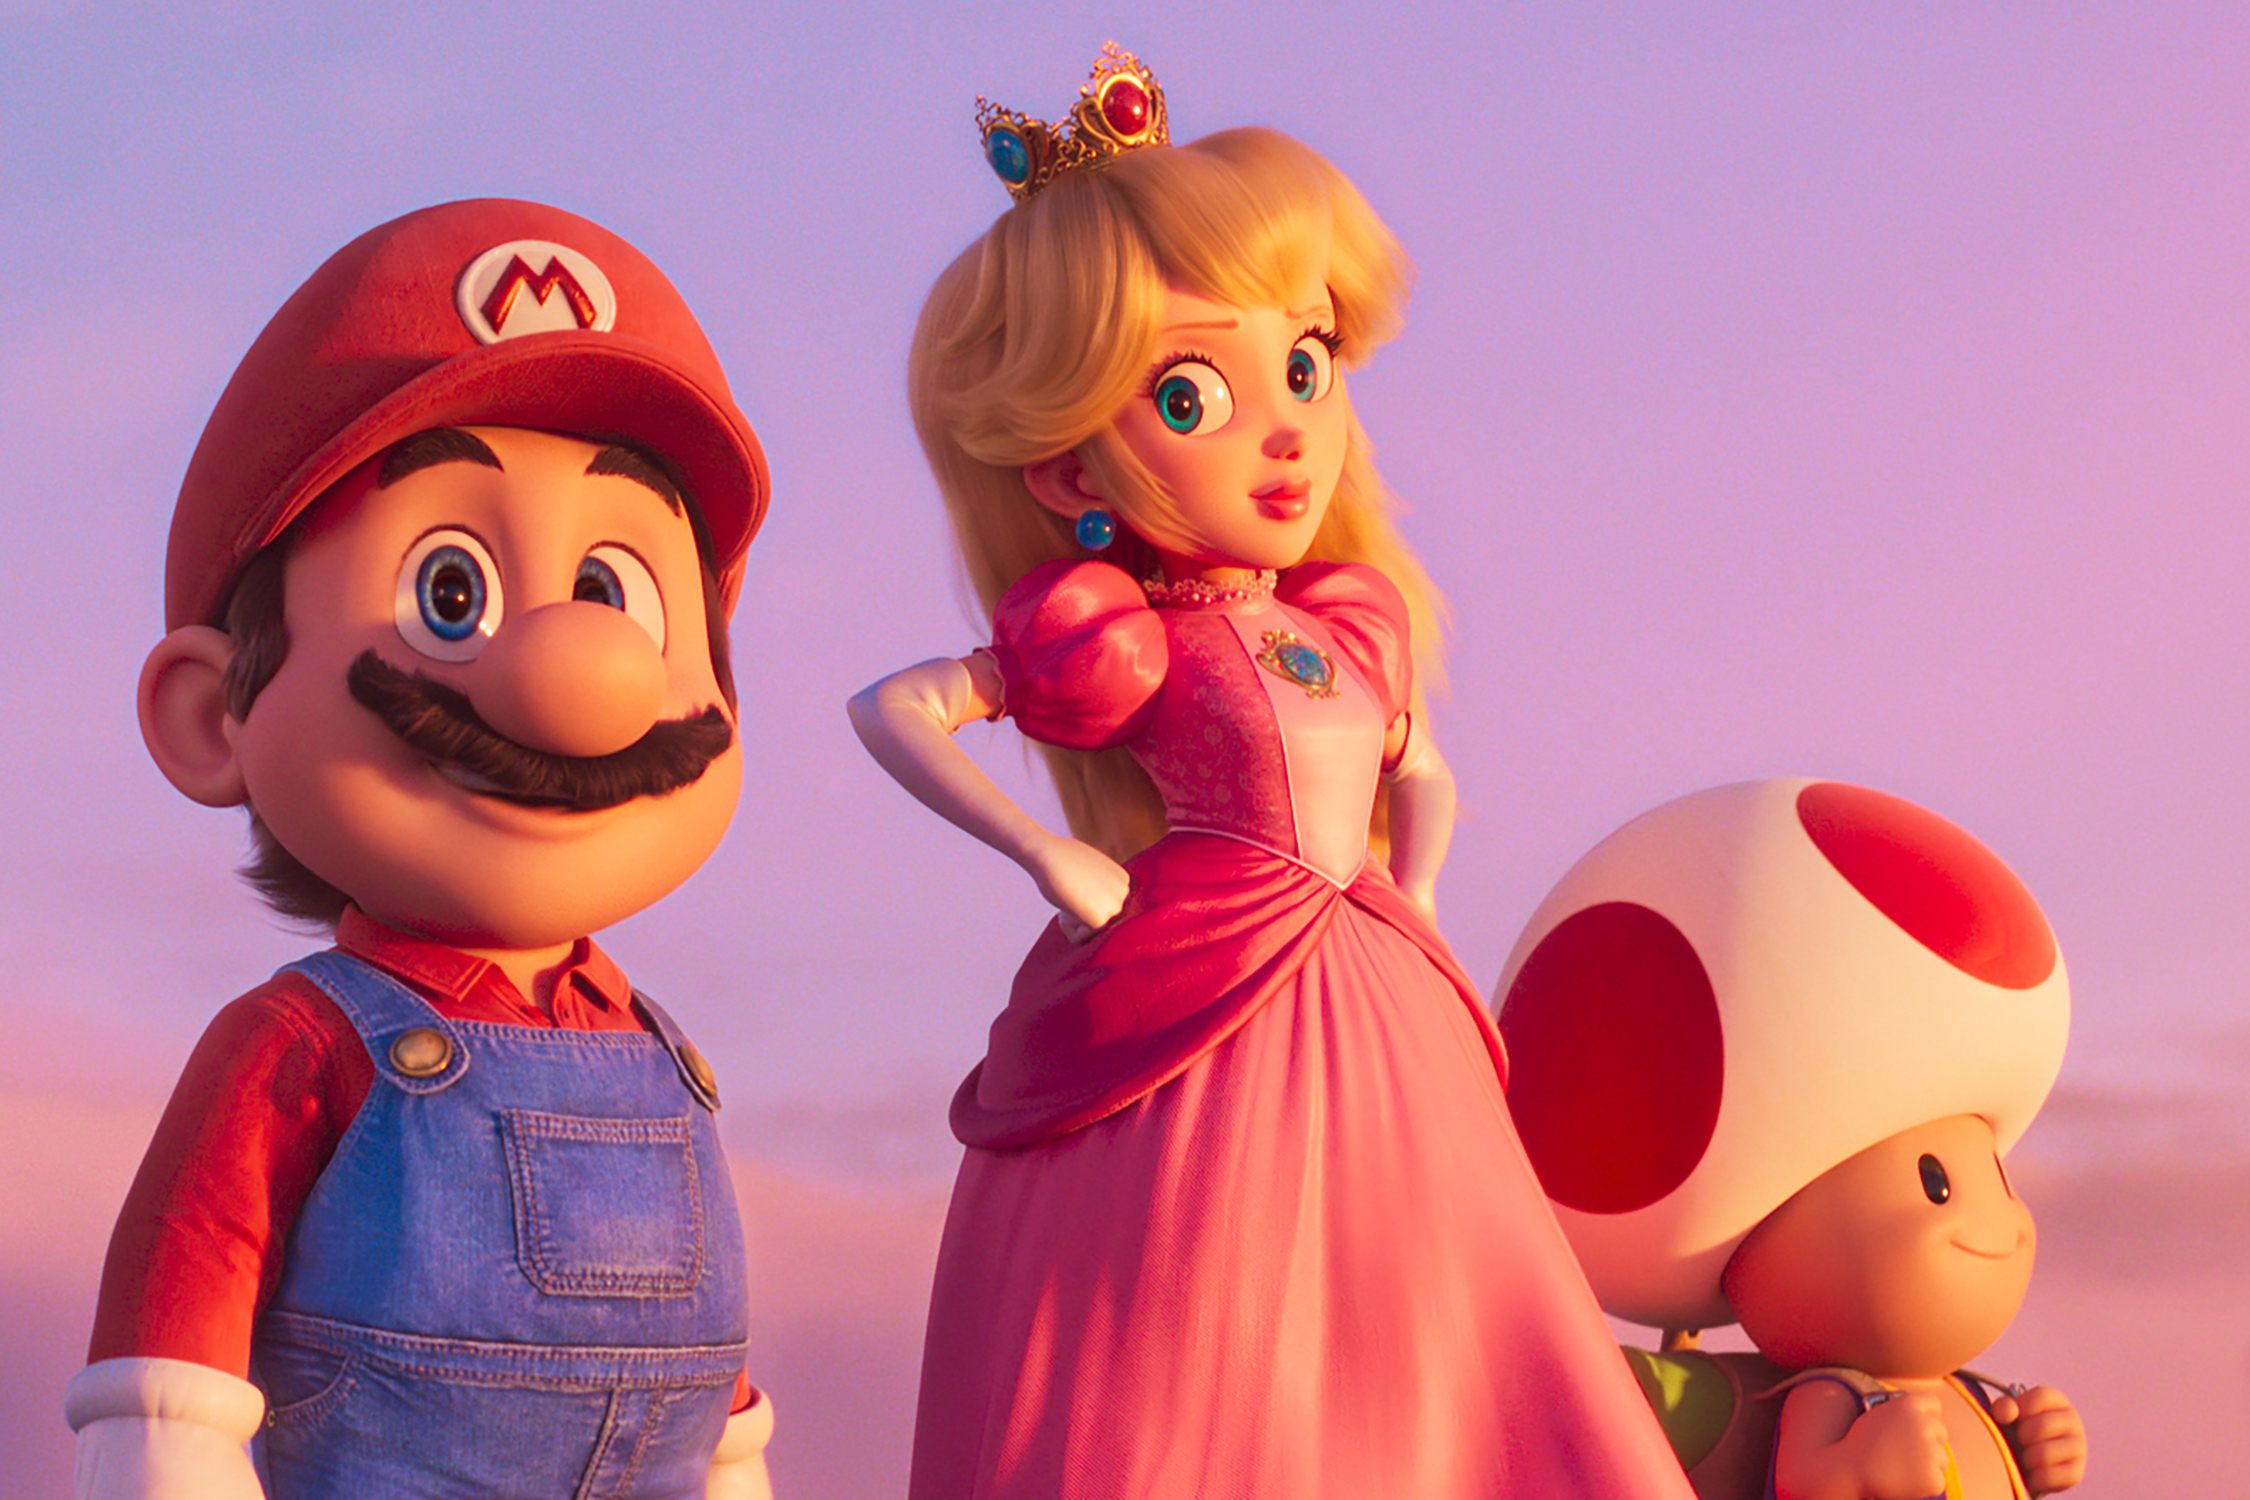 The First Super Mario Bros. Movie Clip Reveals Mario's Introduction to Pipe  Travel